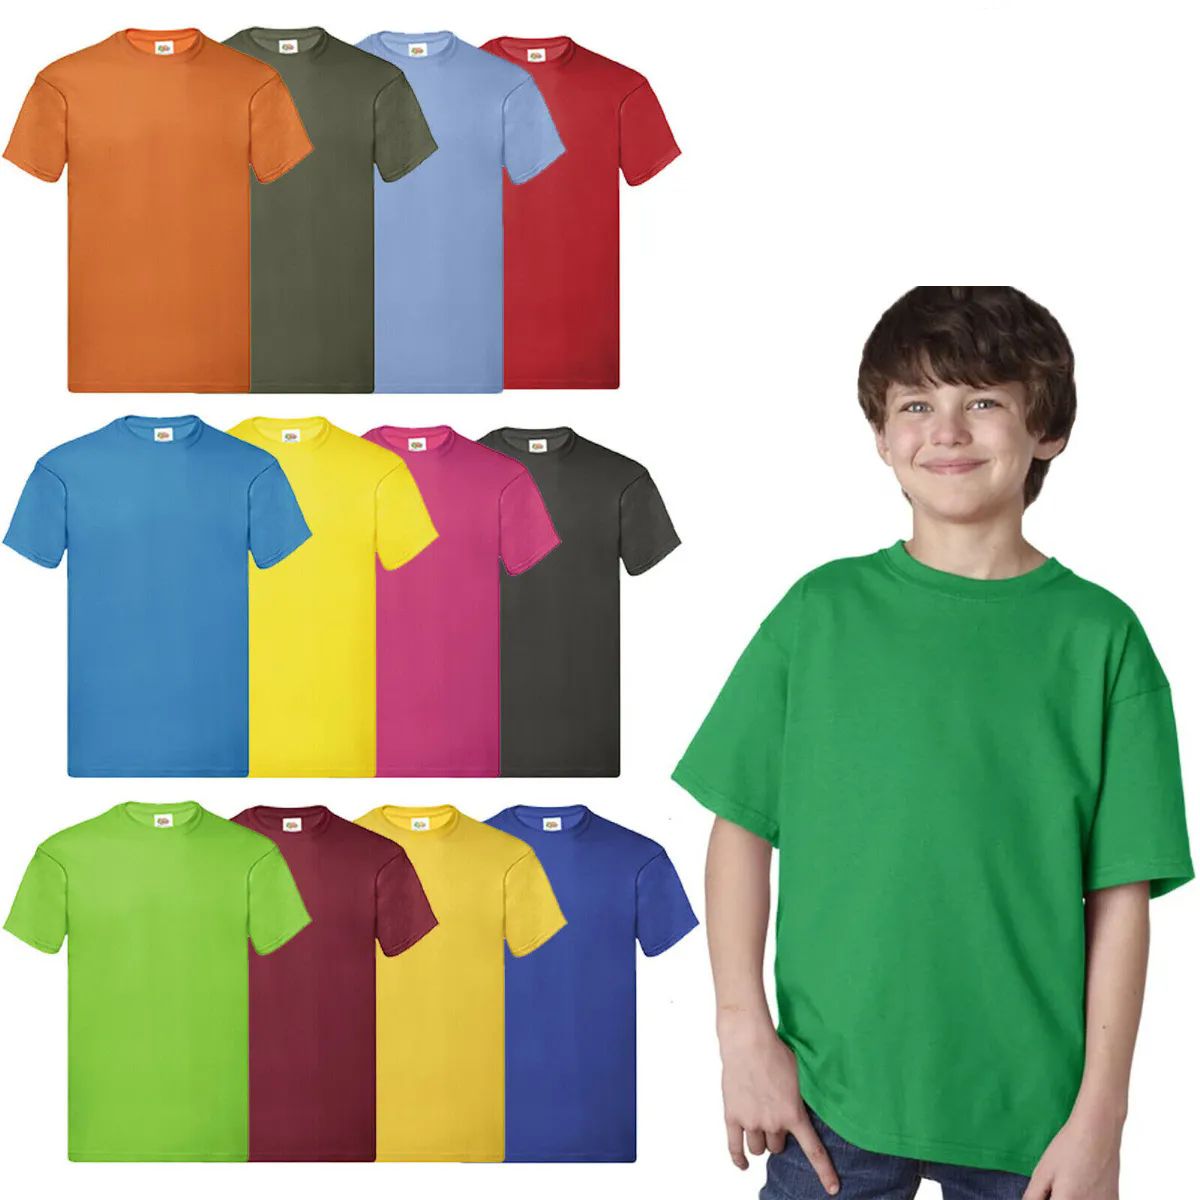 12 Wholesale Billionhats Kids Youth Cotton Assorted Colors T-Shirts Size Small